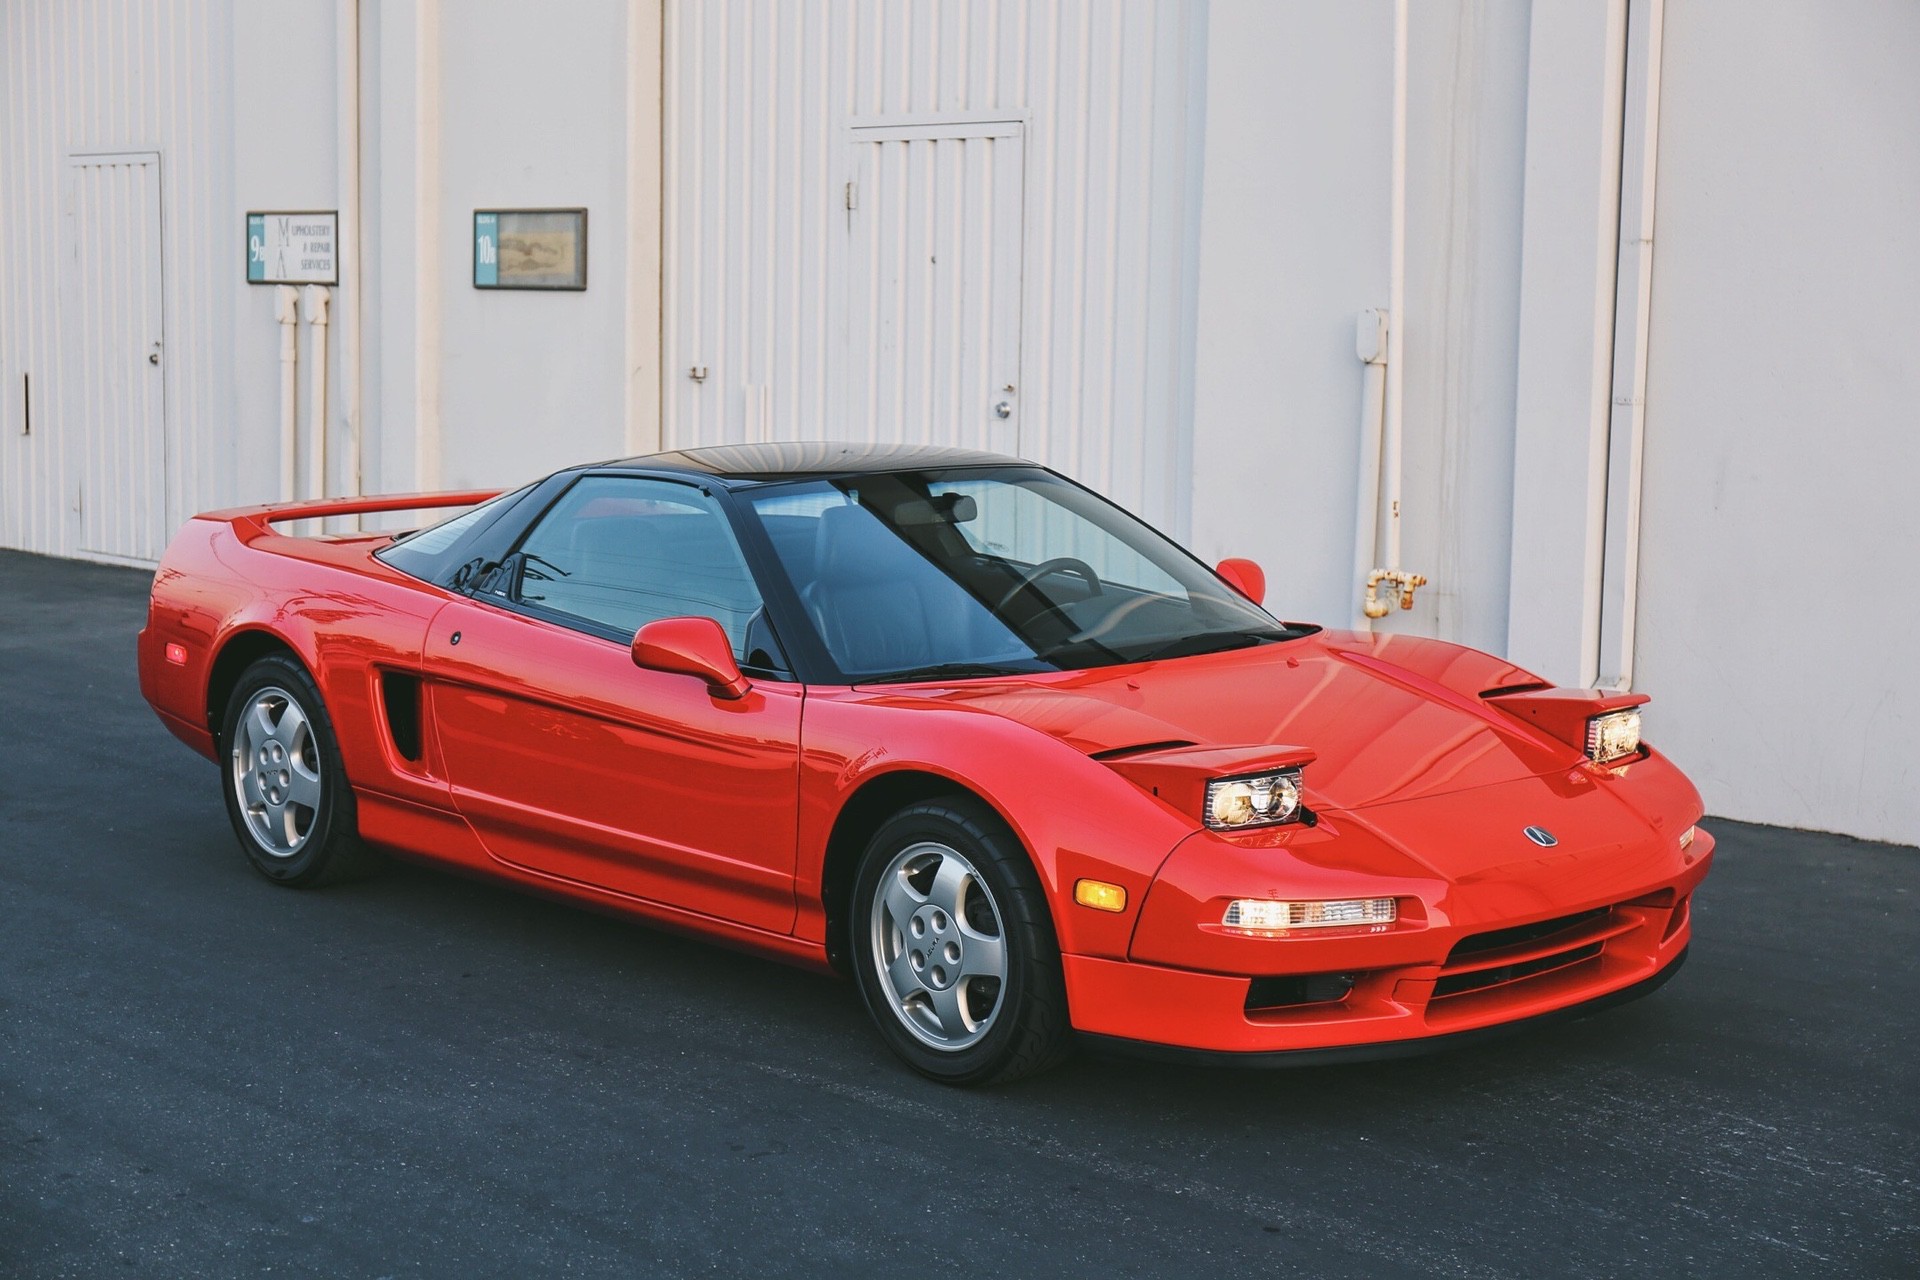 Honda NSX with the cool pop-up headlights